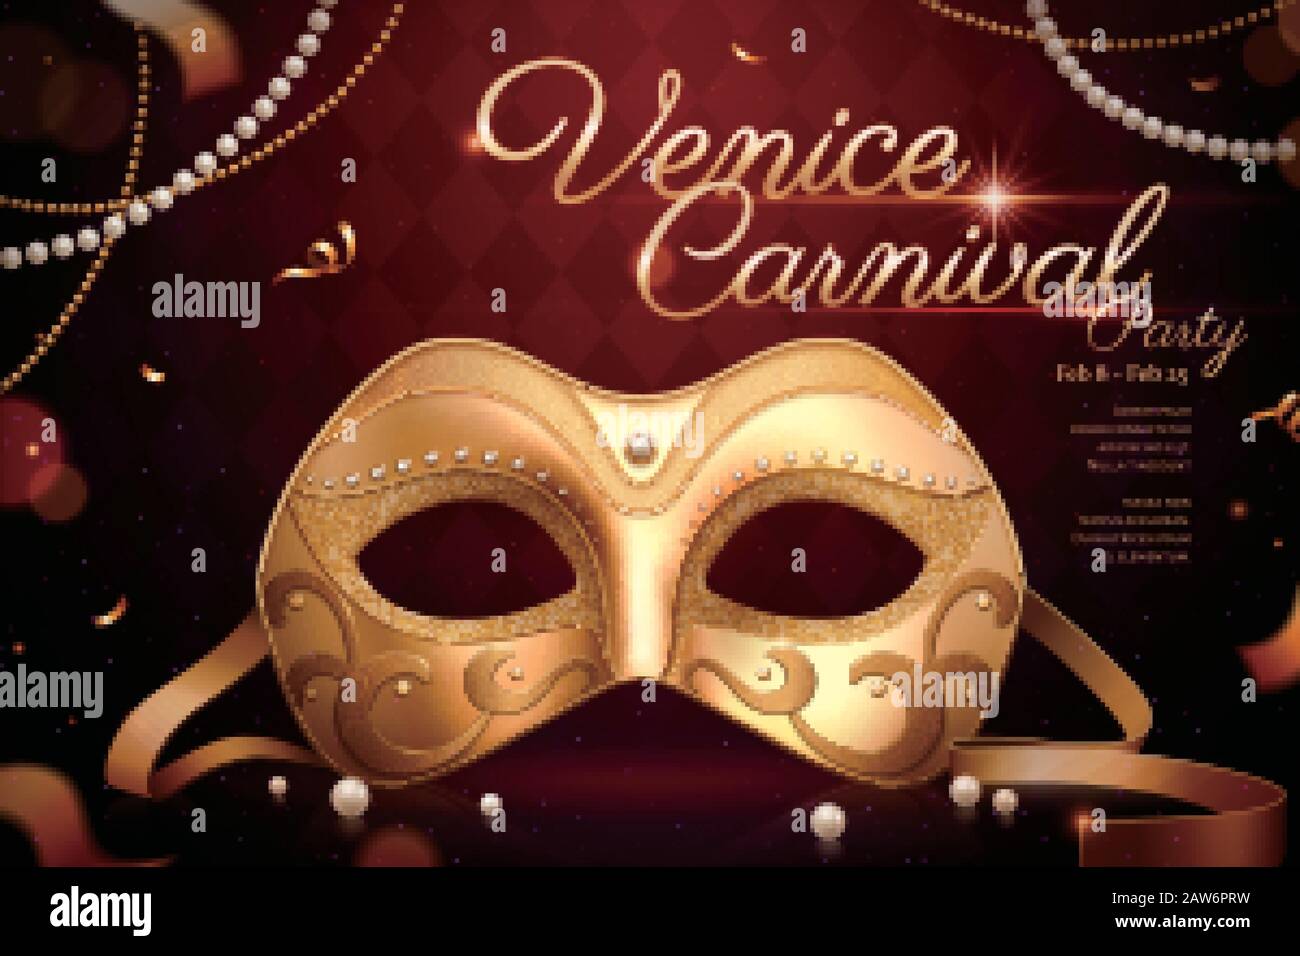 Exquisite Venice carnival design with gold mask and confetti on burgundy red background in 3d illustration Stock Vector